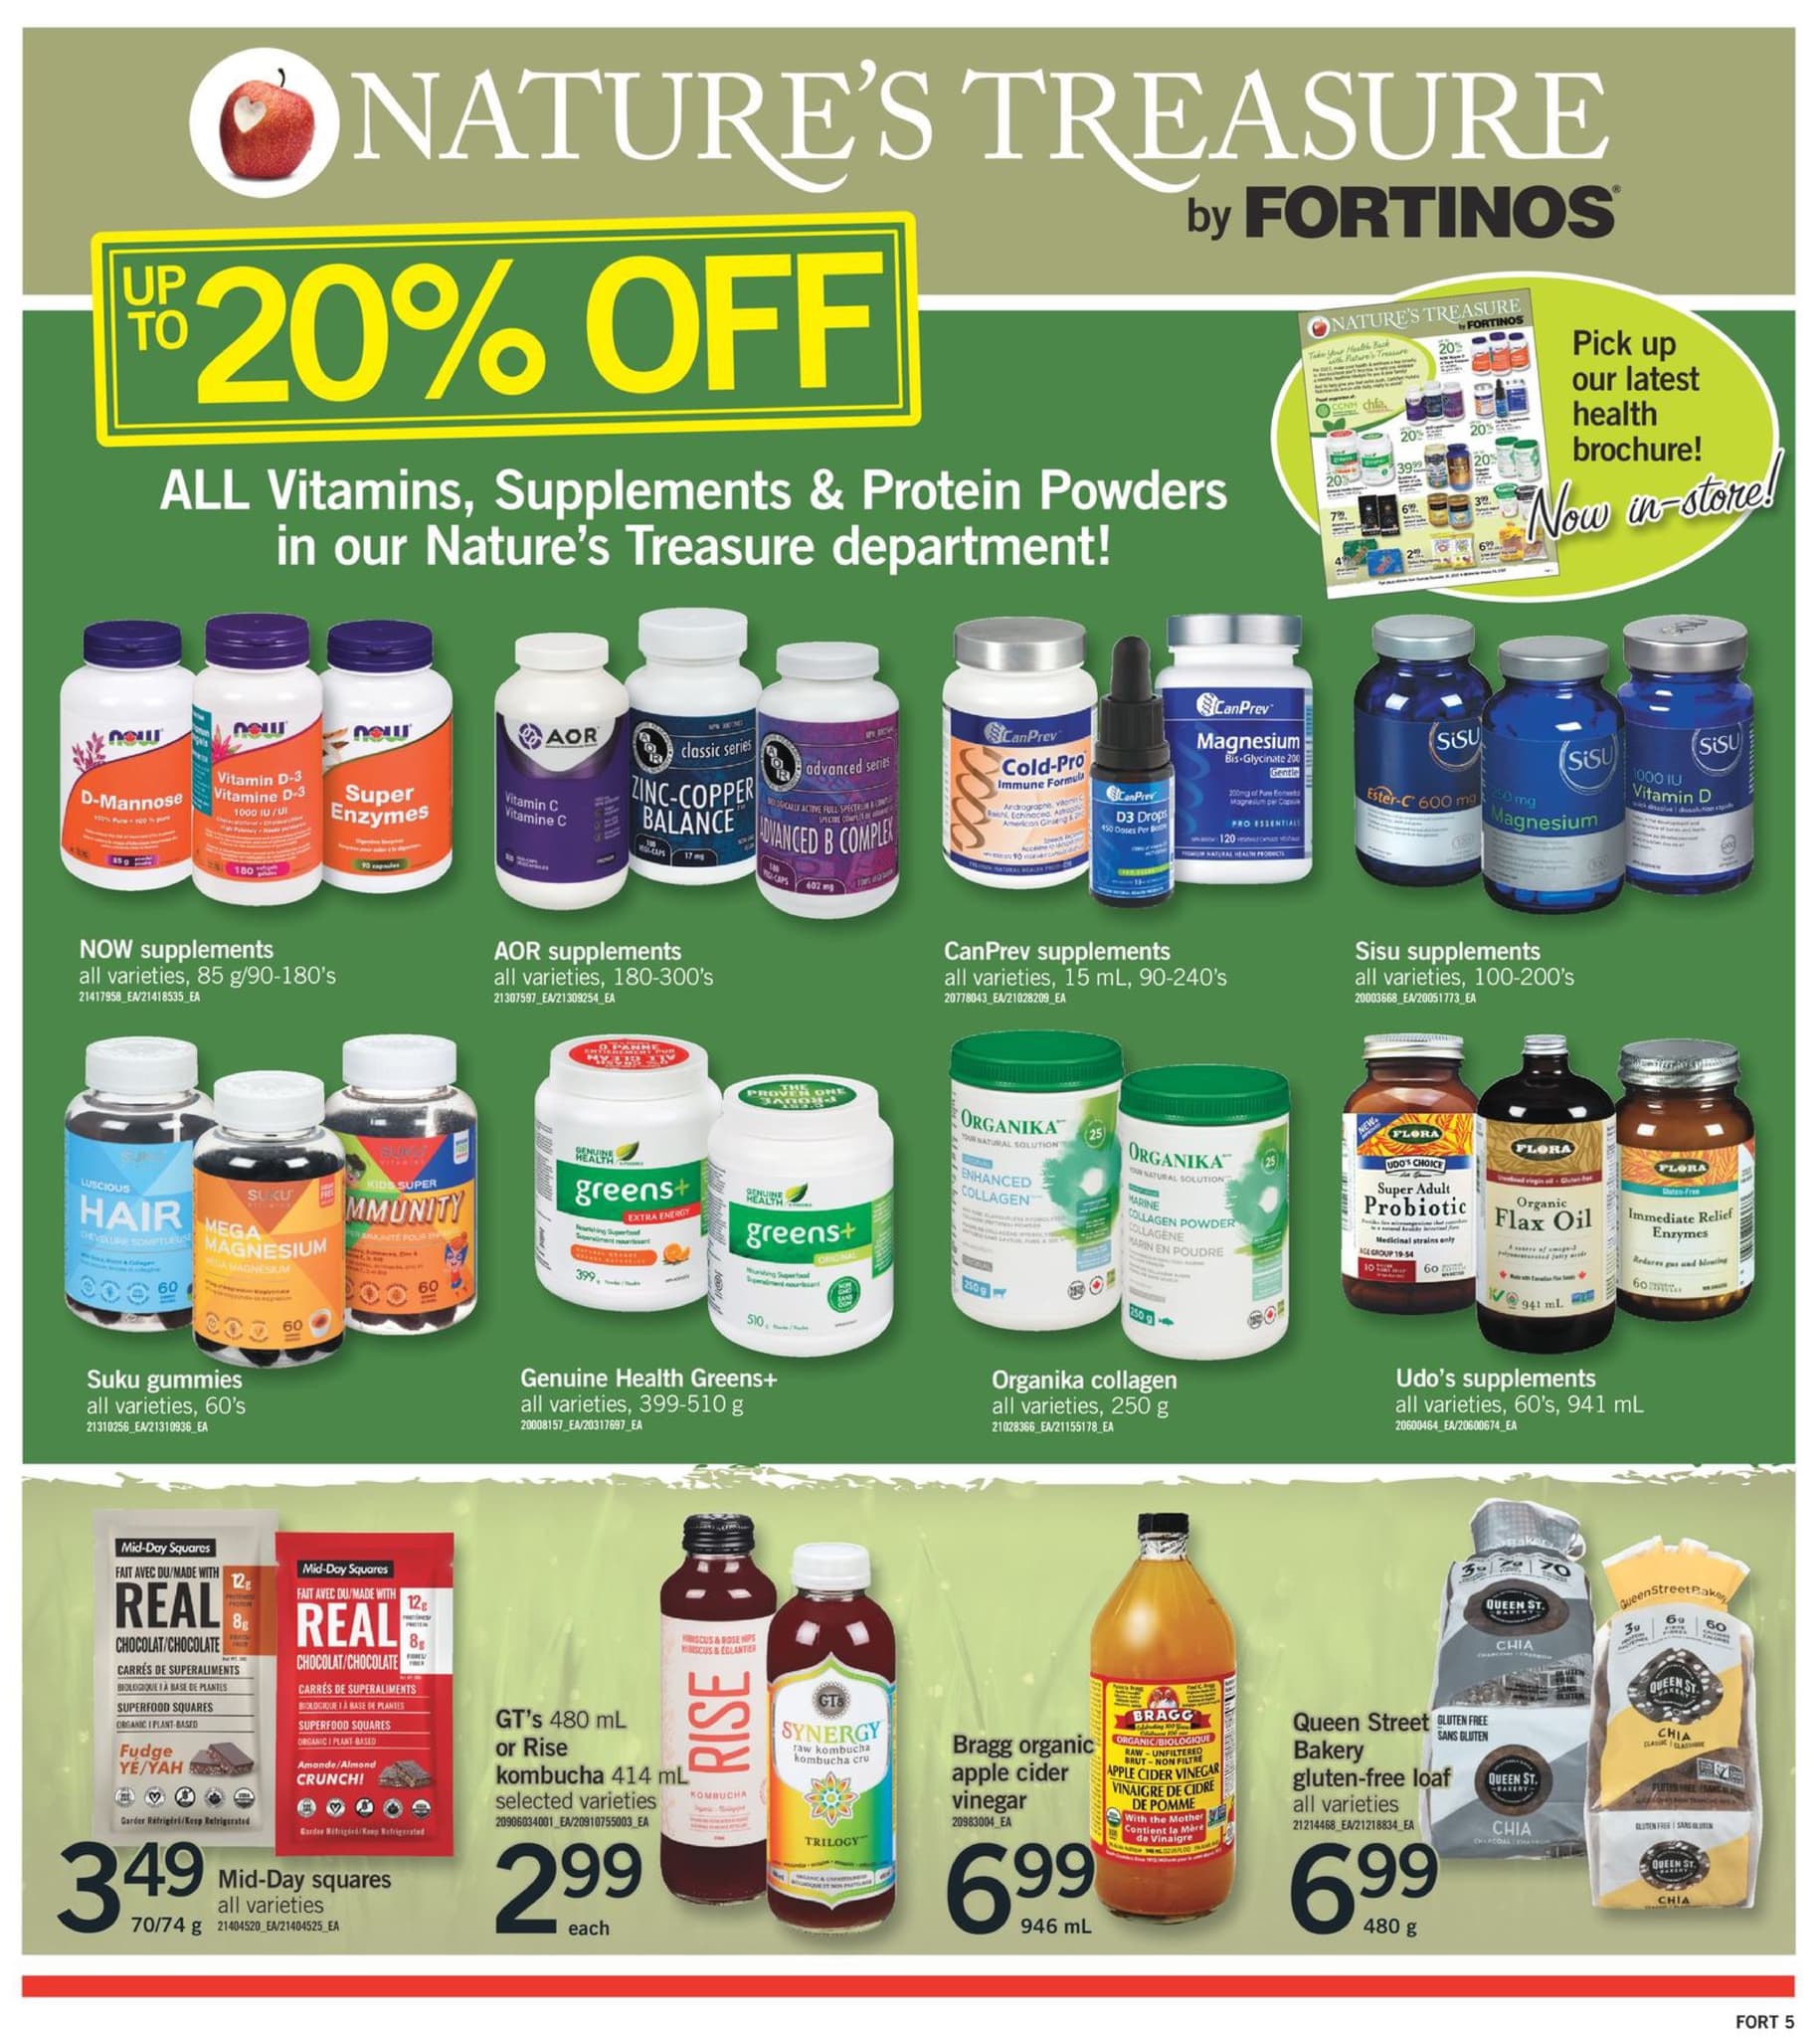 Fortinos - Weekly Flyer Specials - Page 6